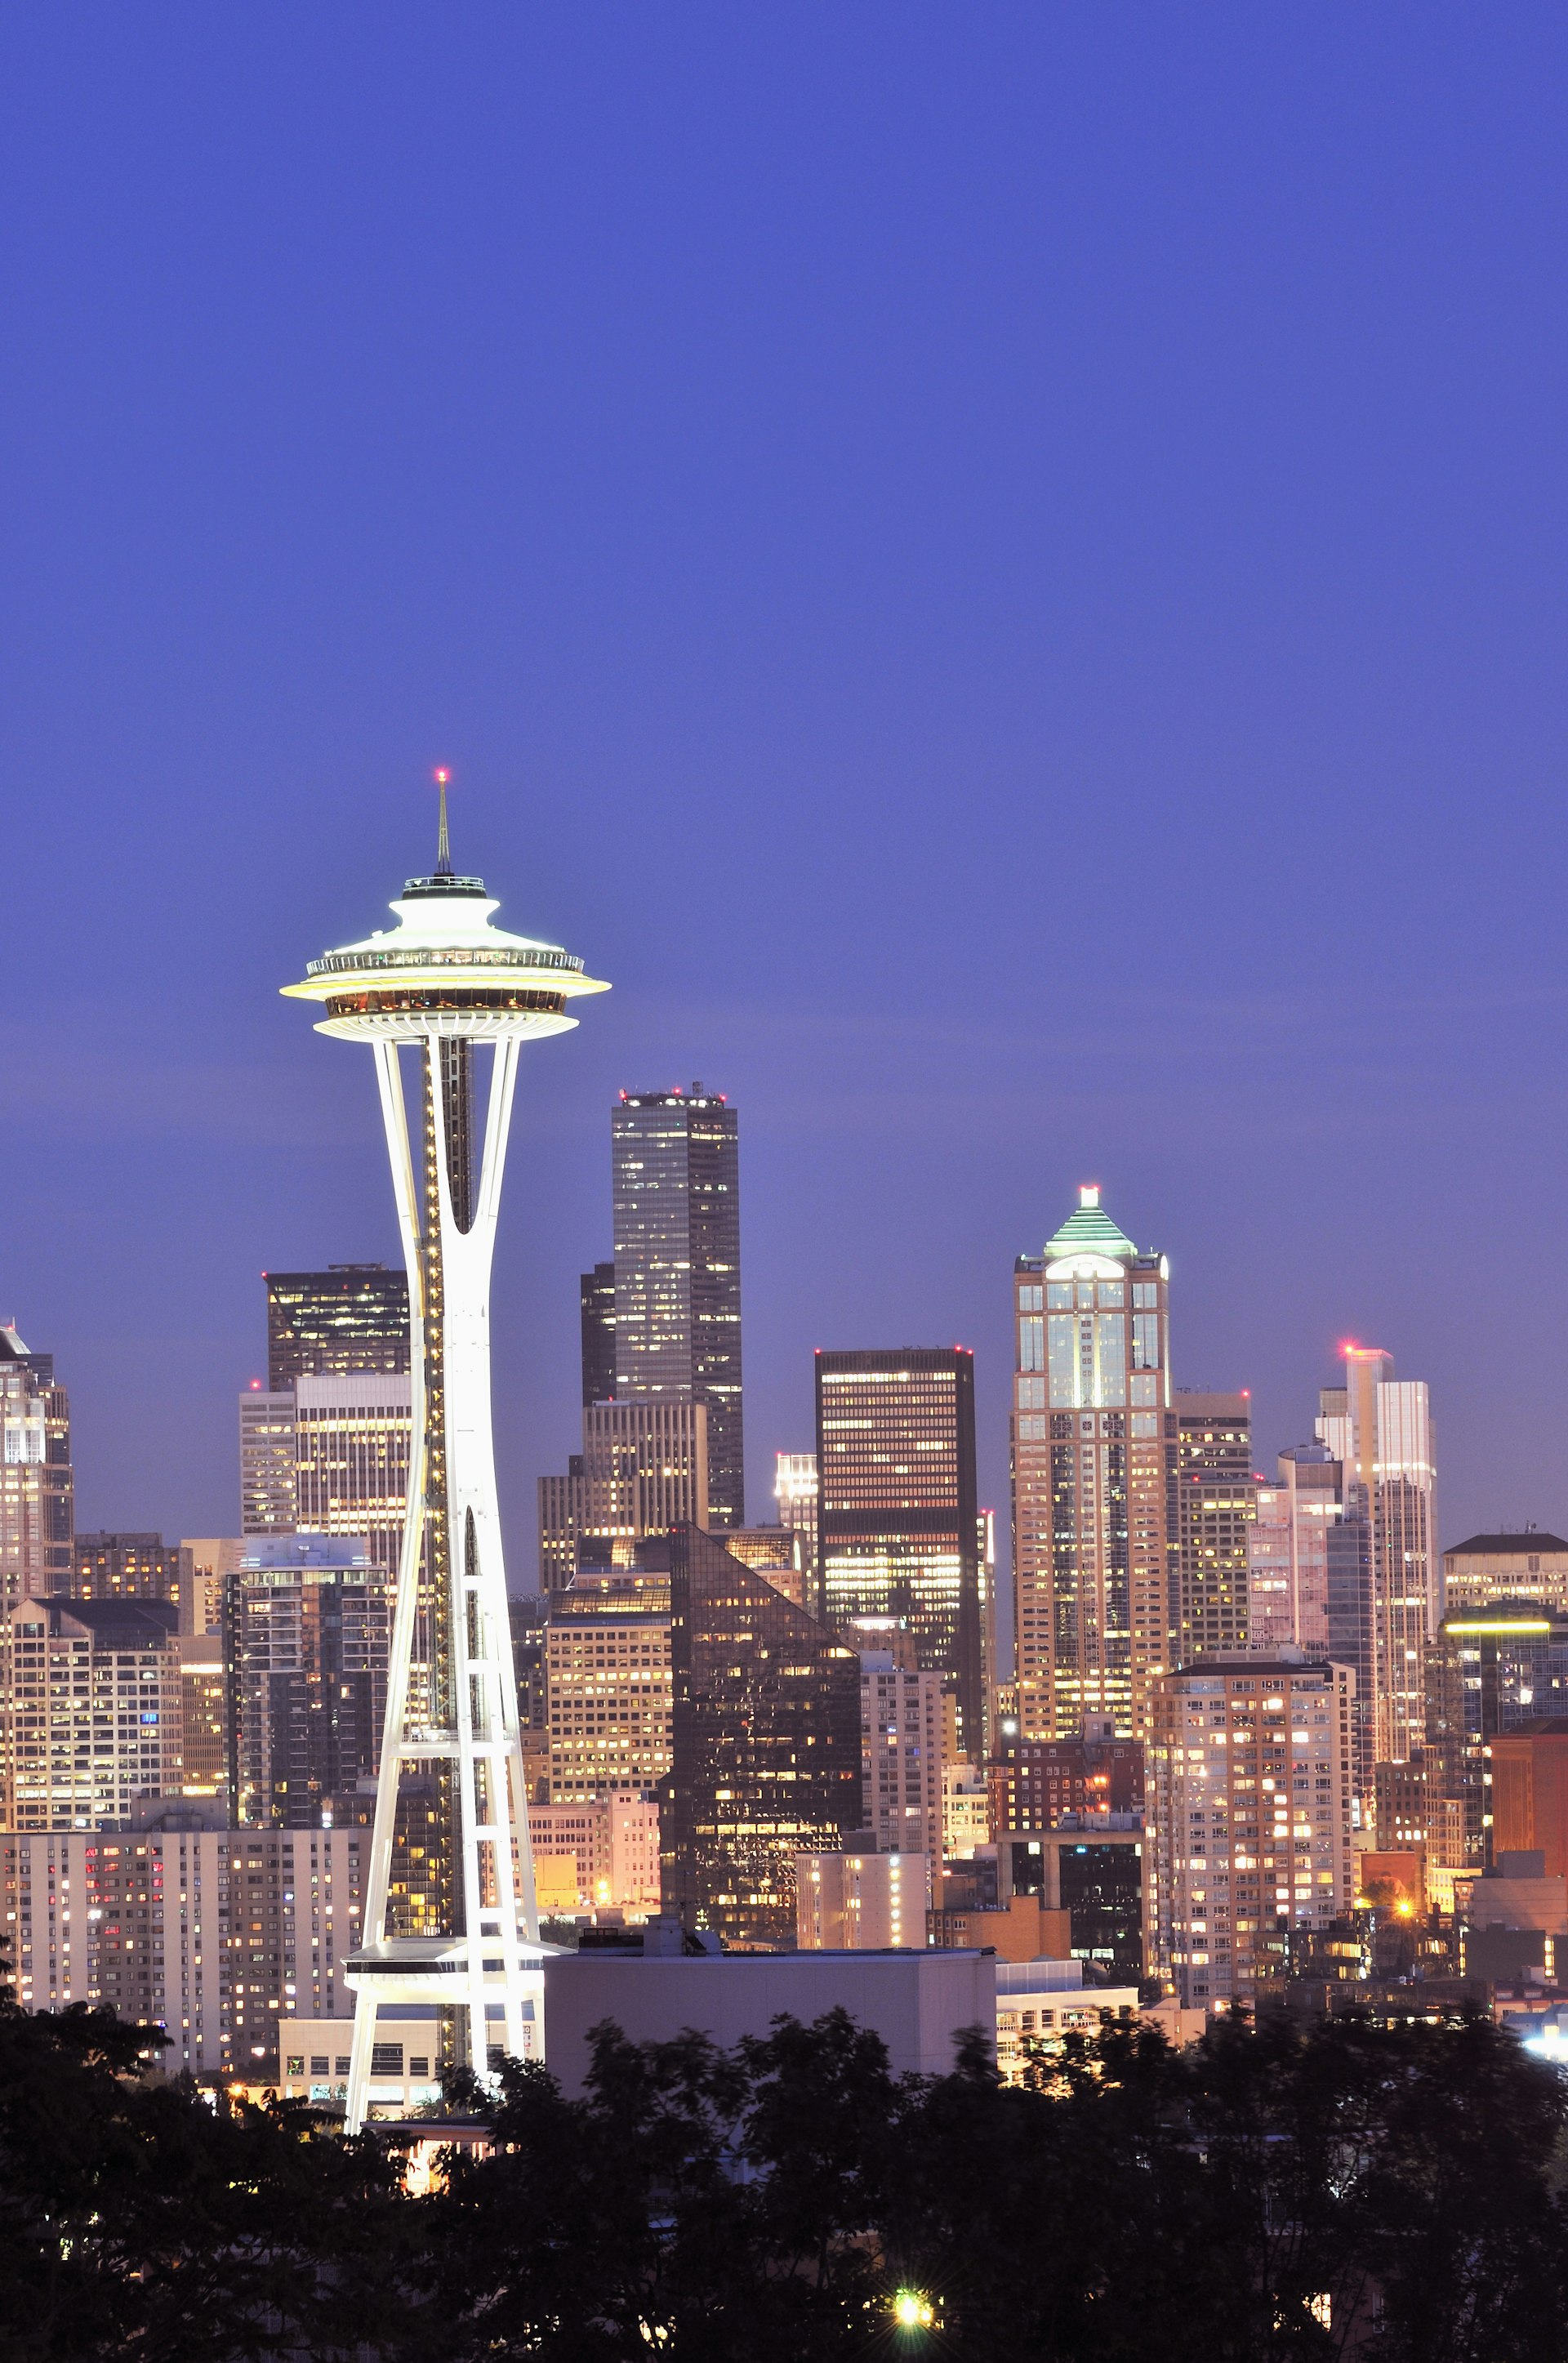 A large UFO-like dish sits on top of tall white legs and dominates the skyline of the city of Seattle